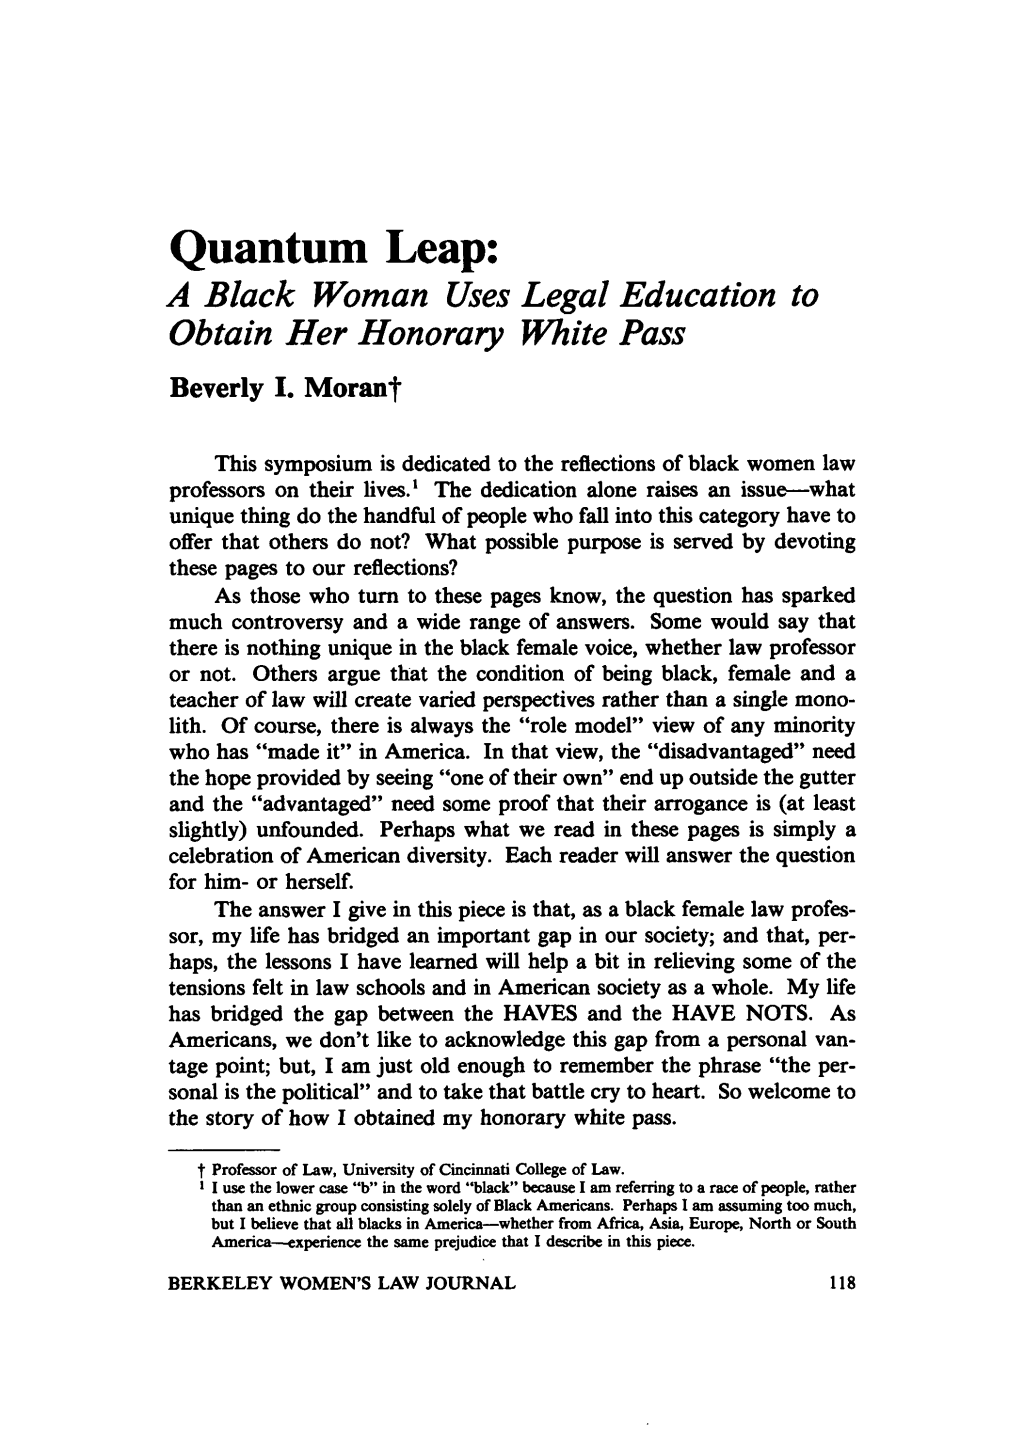 Quantum Leap: a Black Woman Uses Legal Education to Obtain Her Honorary White Pass Beverly I